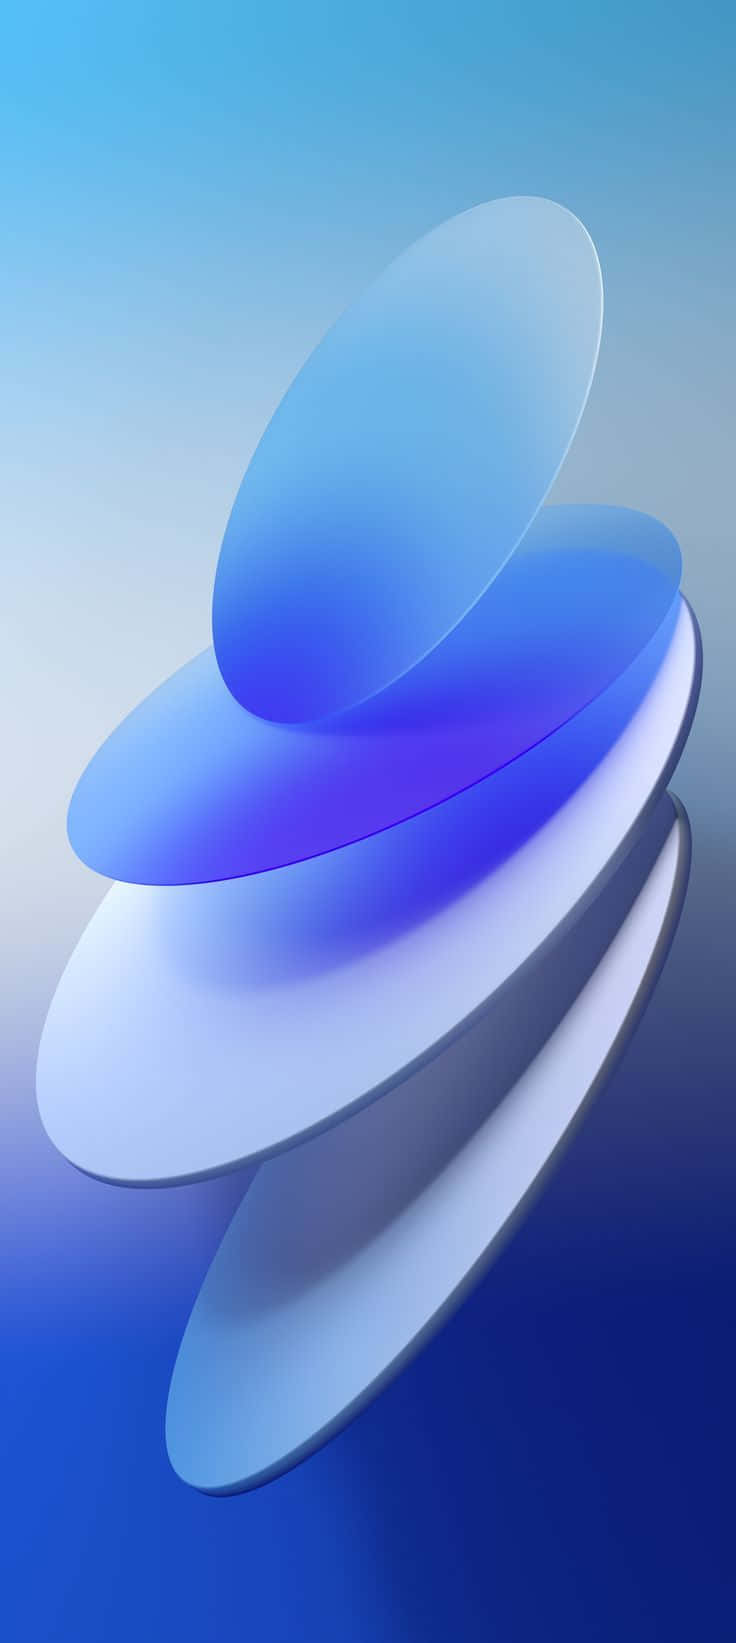 A Blue And White Abstract Design Wallpaper